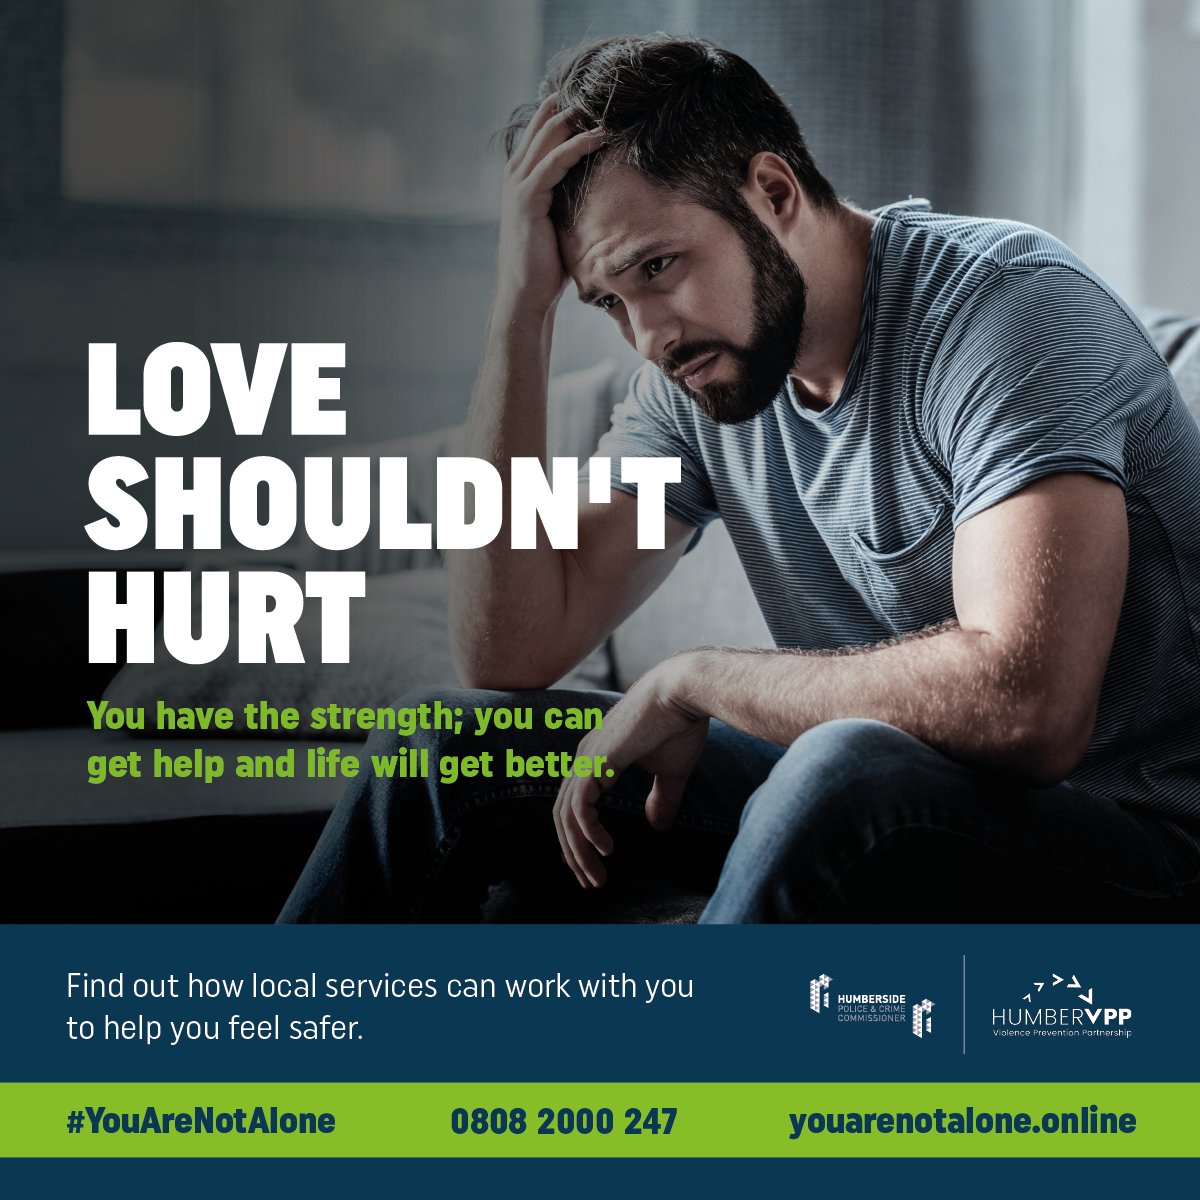 Domestic Abuse can affect anyone. Services in your area are ready to help. For help and support - visit ow.ly/432f50QVRKn